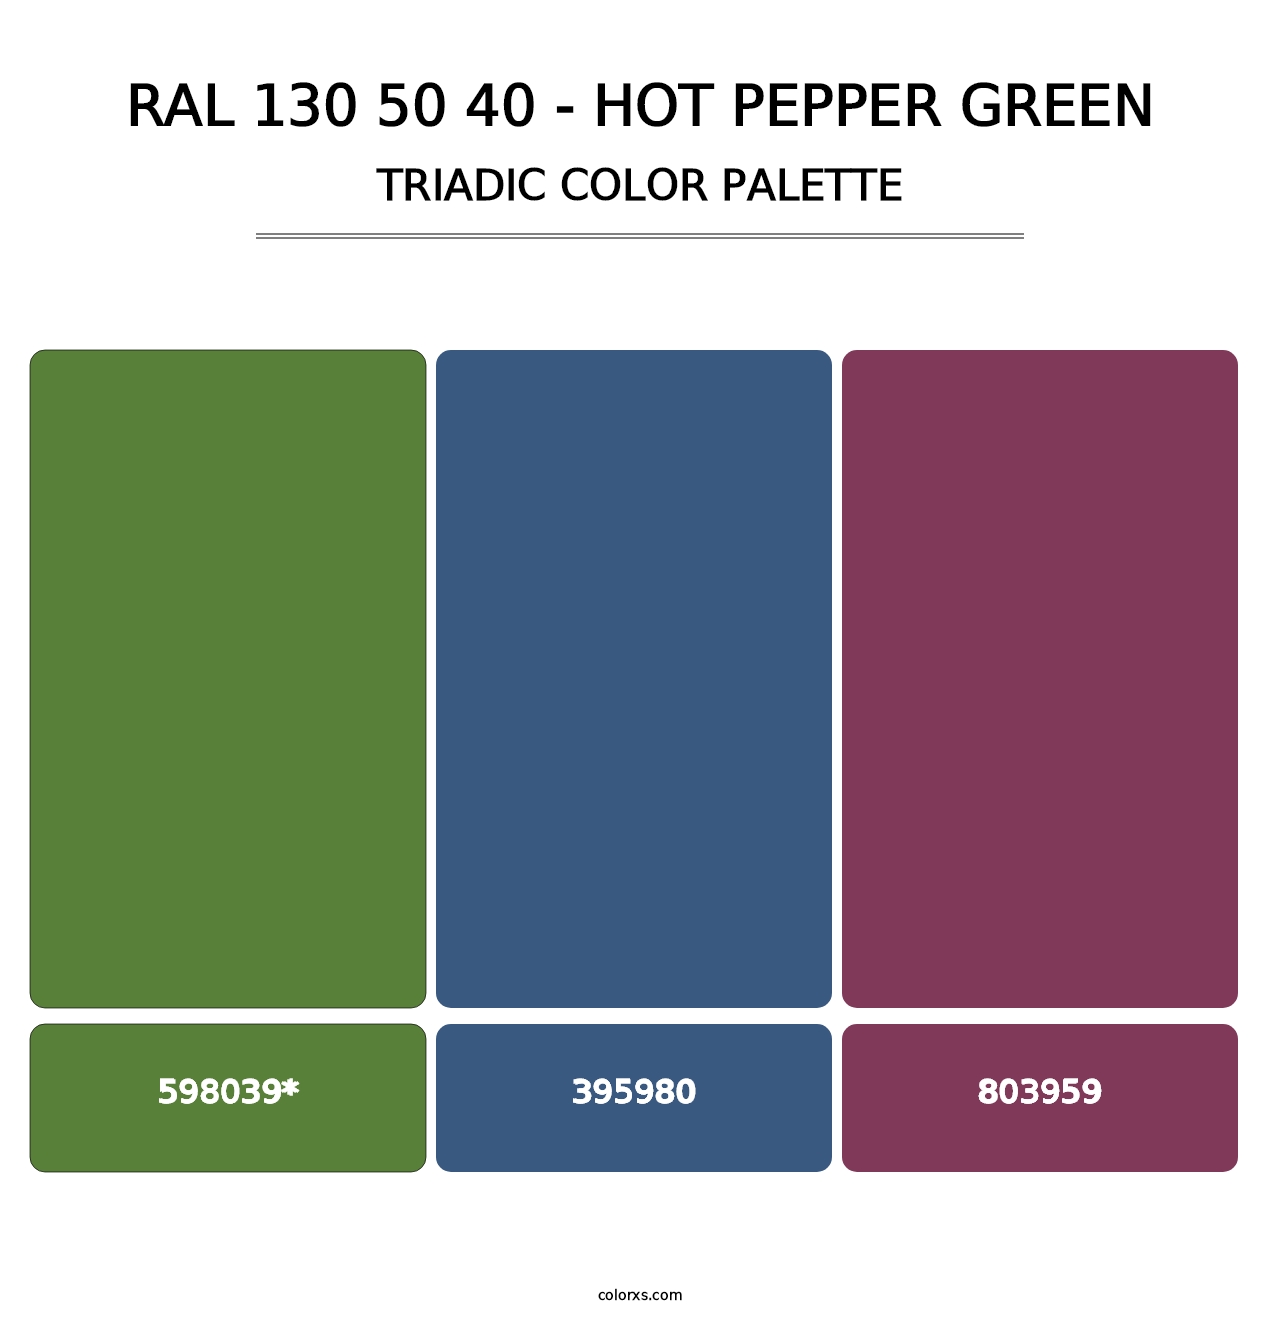 RAL 130 50 40 - Hot Pepper Green - Triadic Color Palette